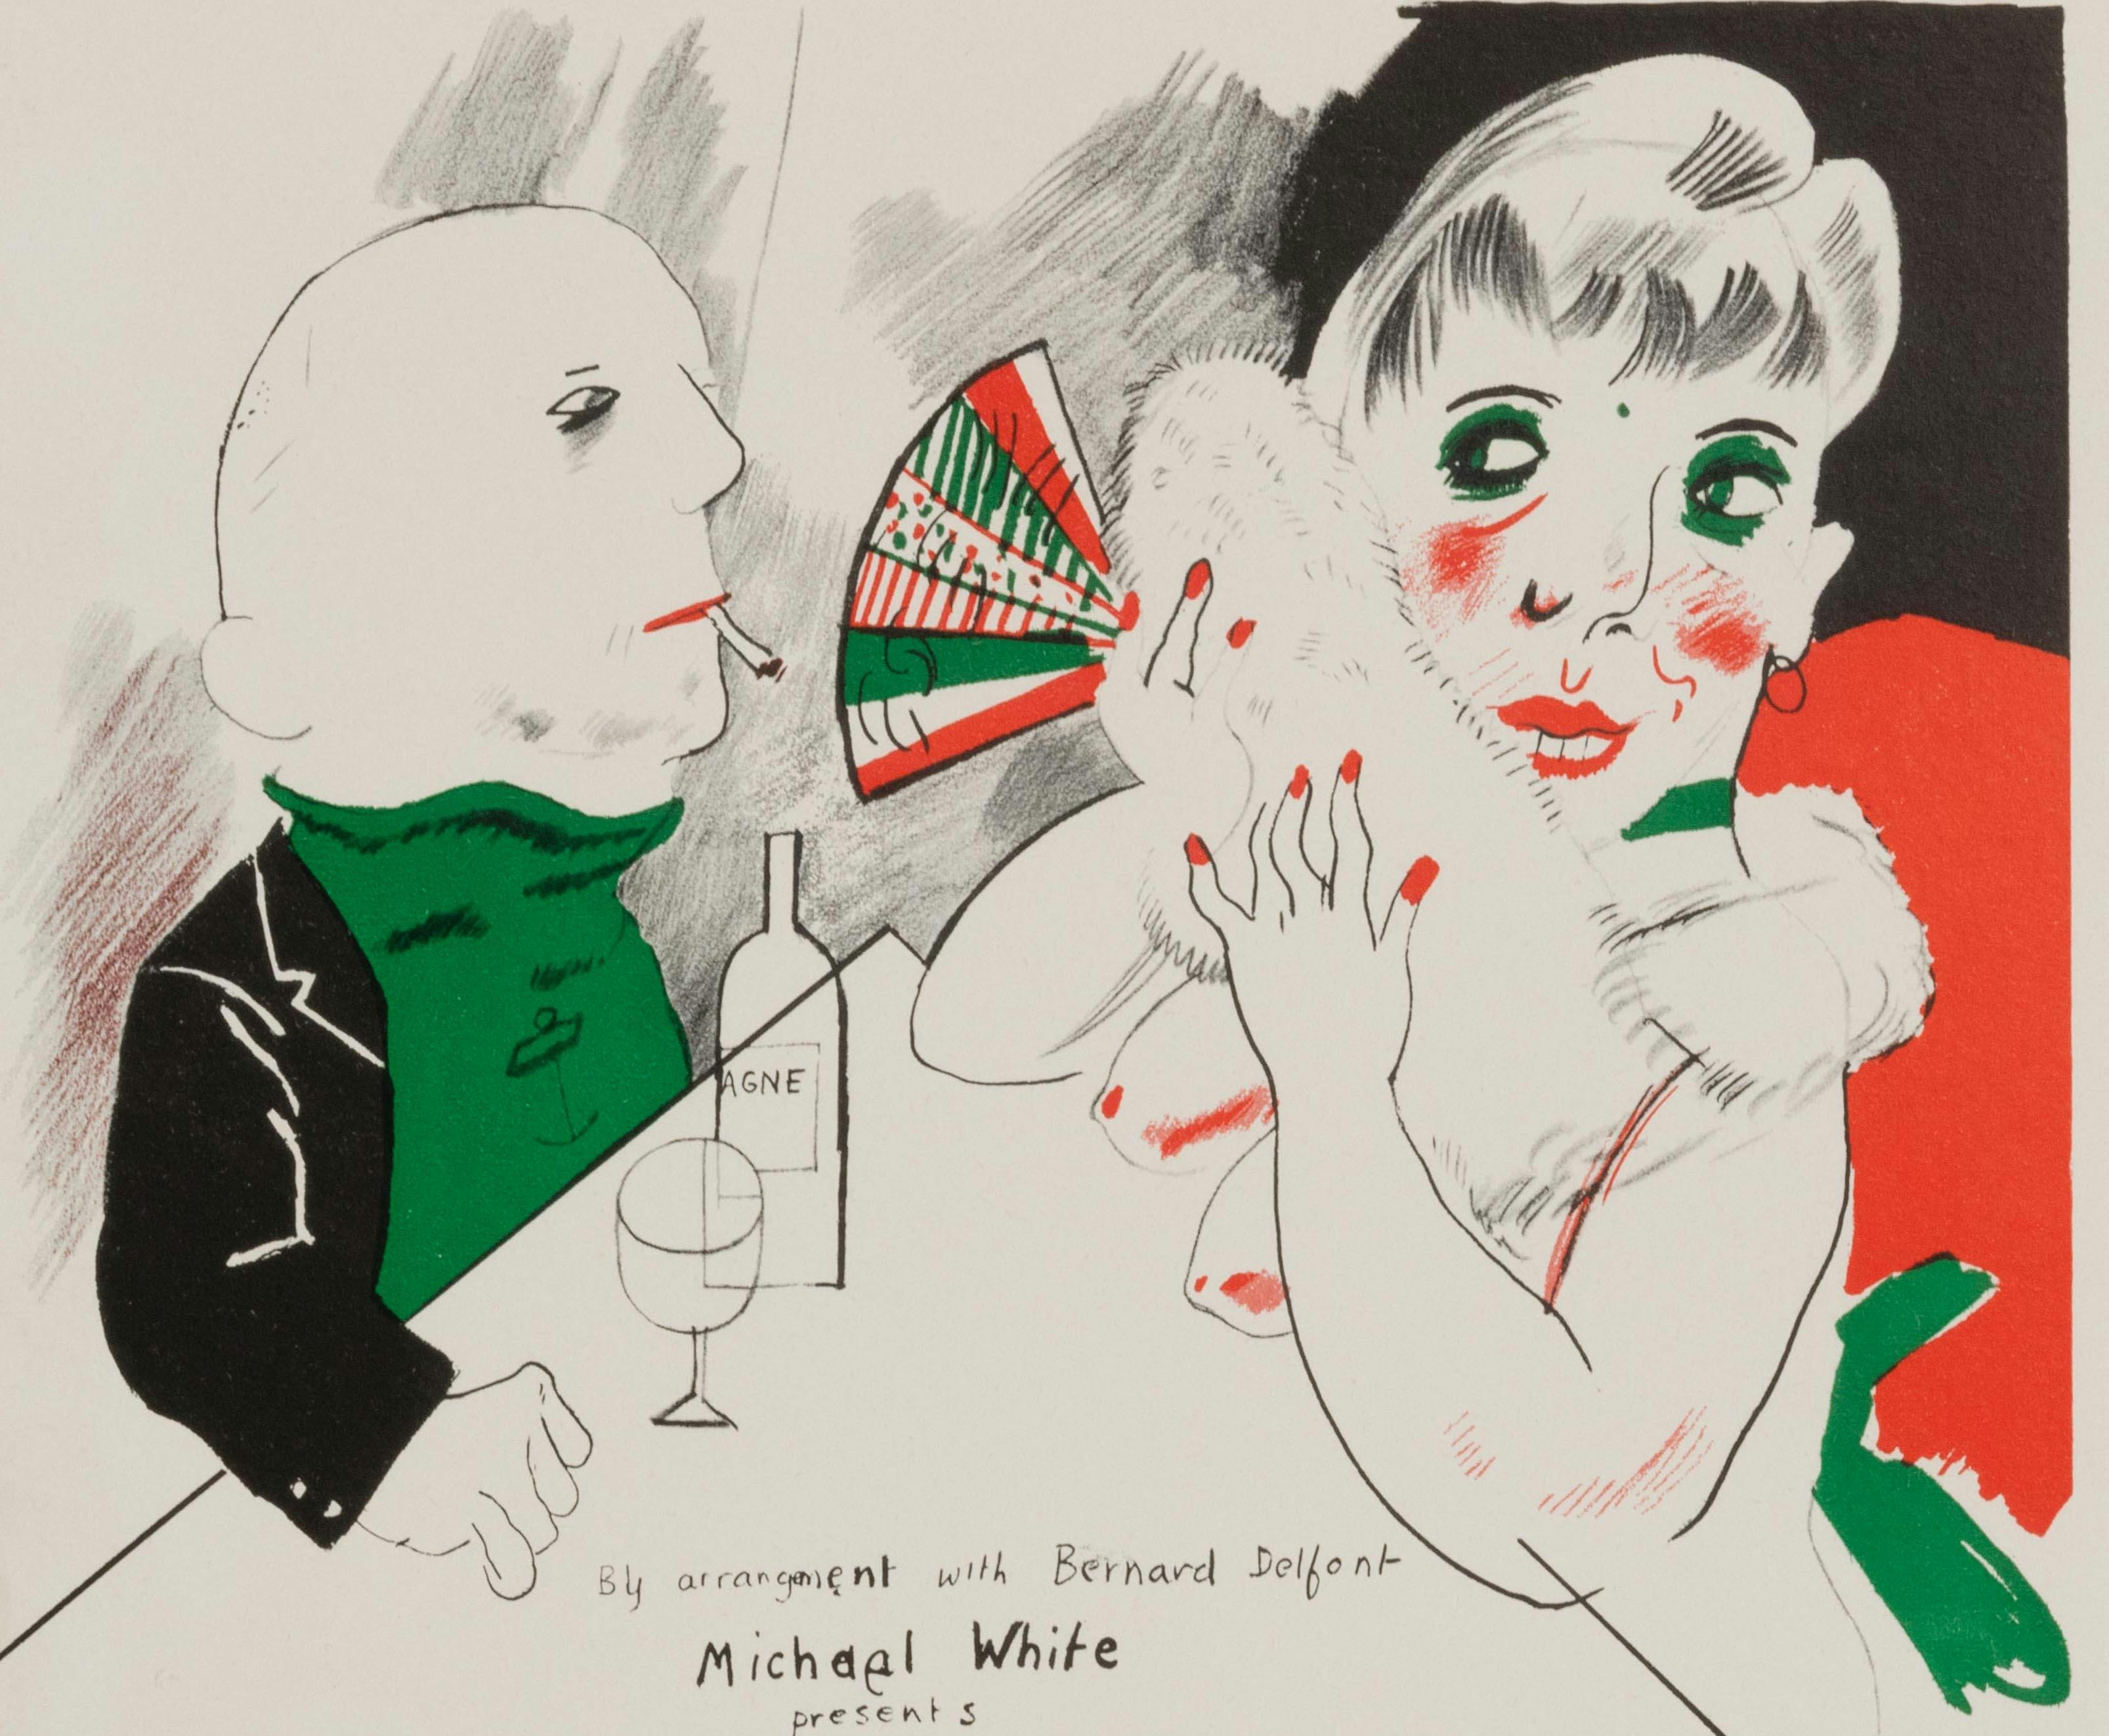 Detail of The ThreePenny Opera, rare theatre poster by David Hockney, 1971